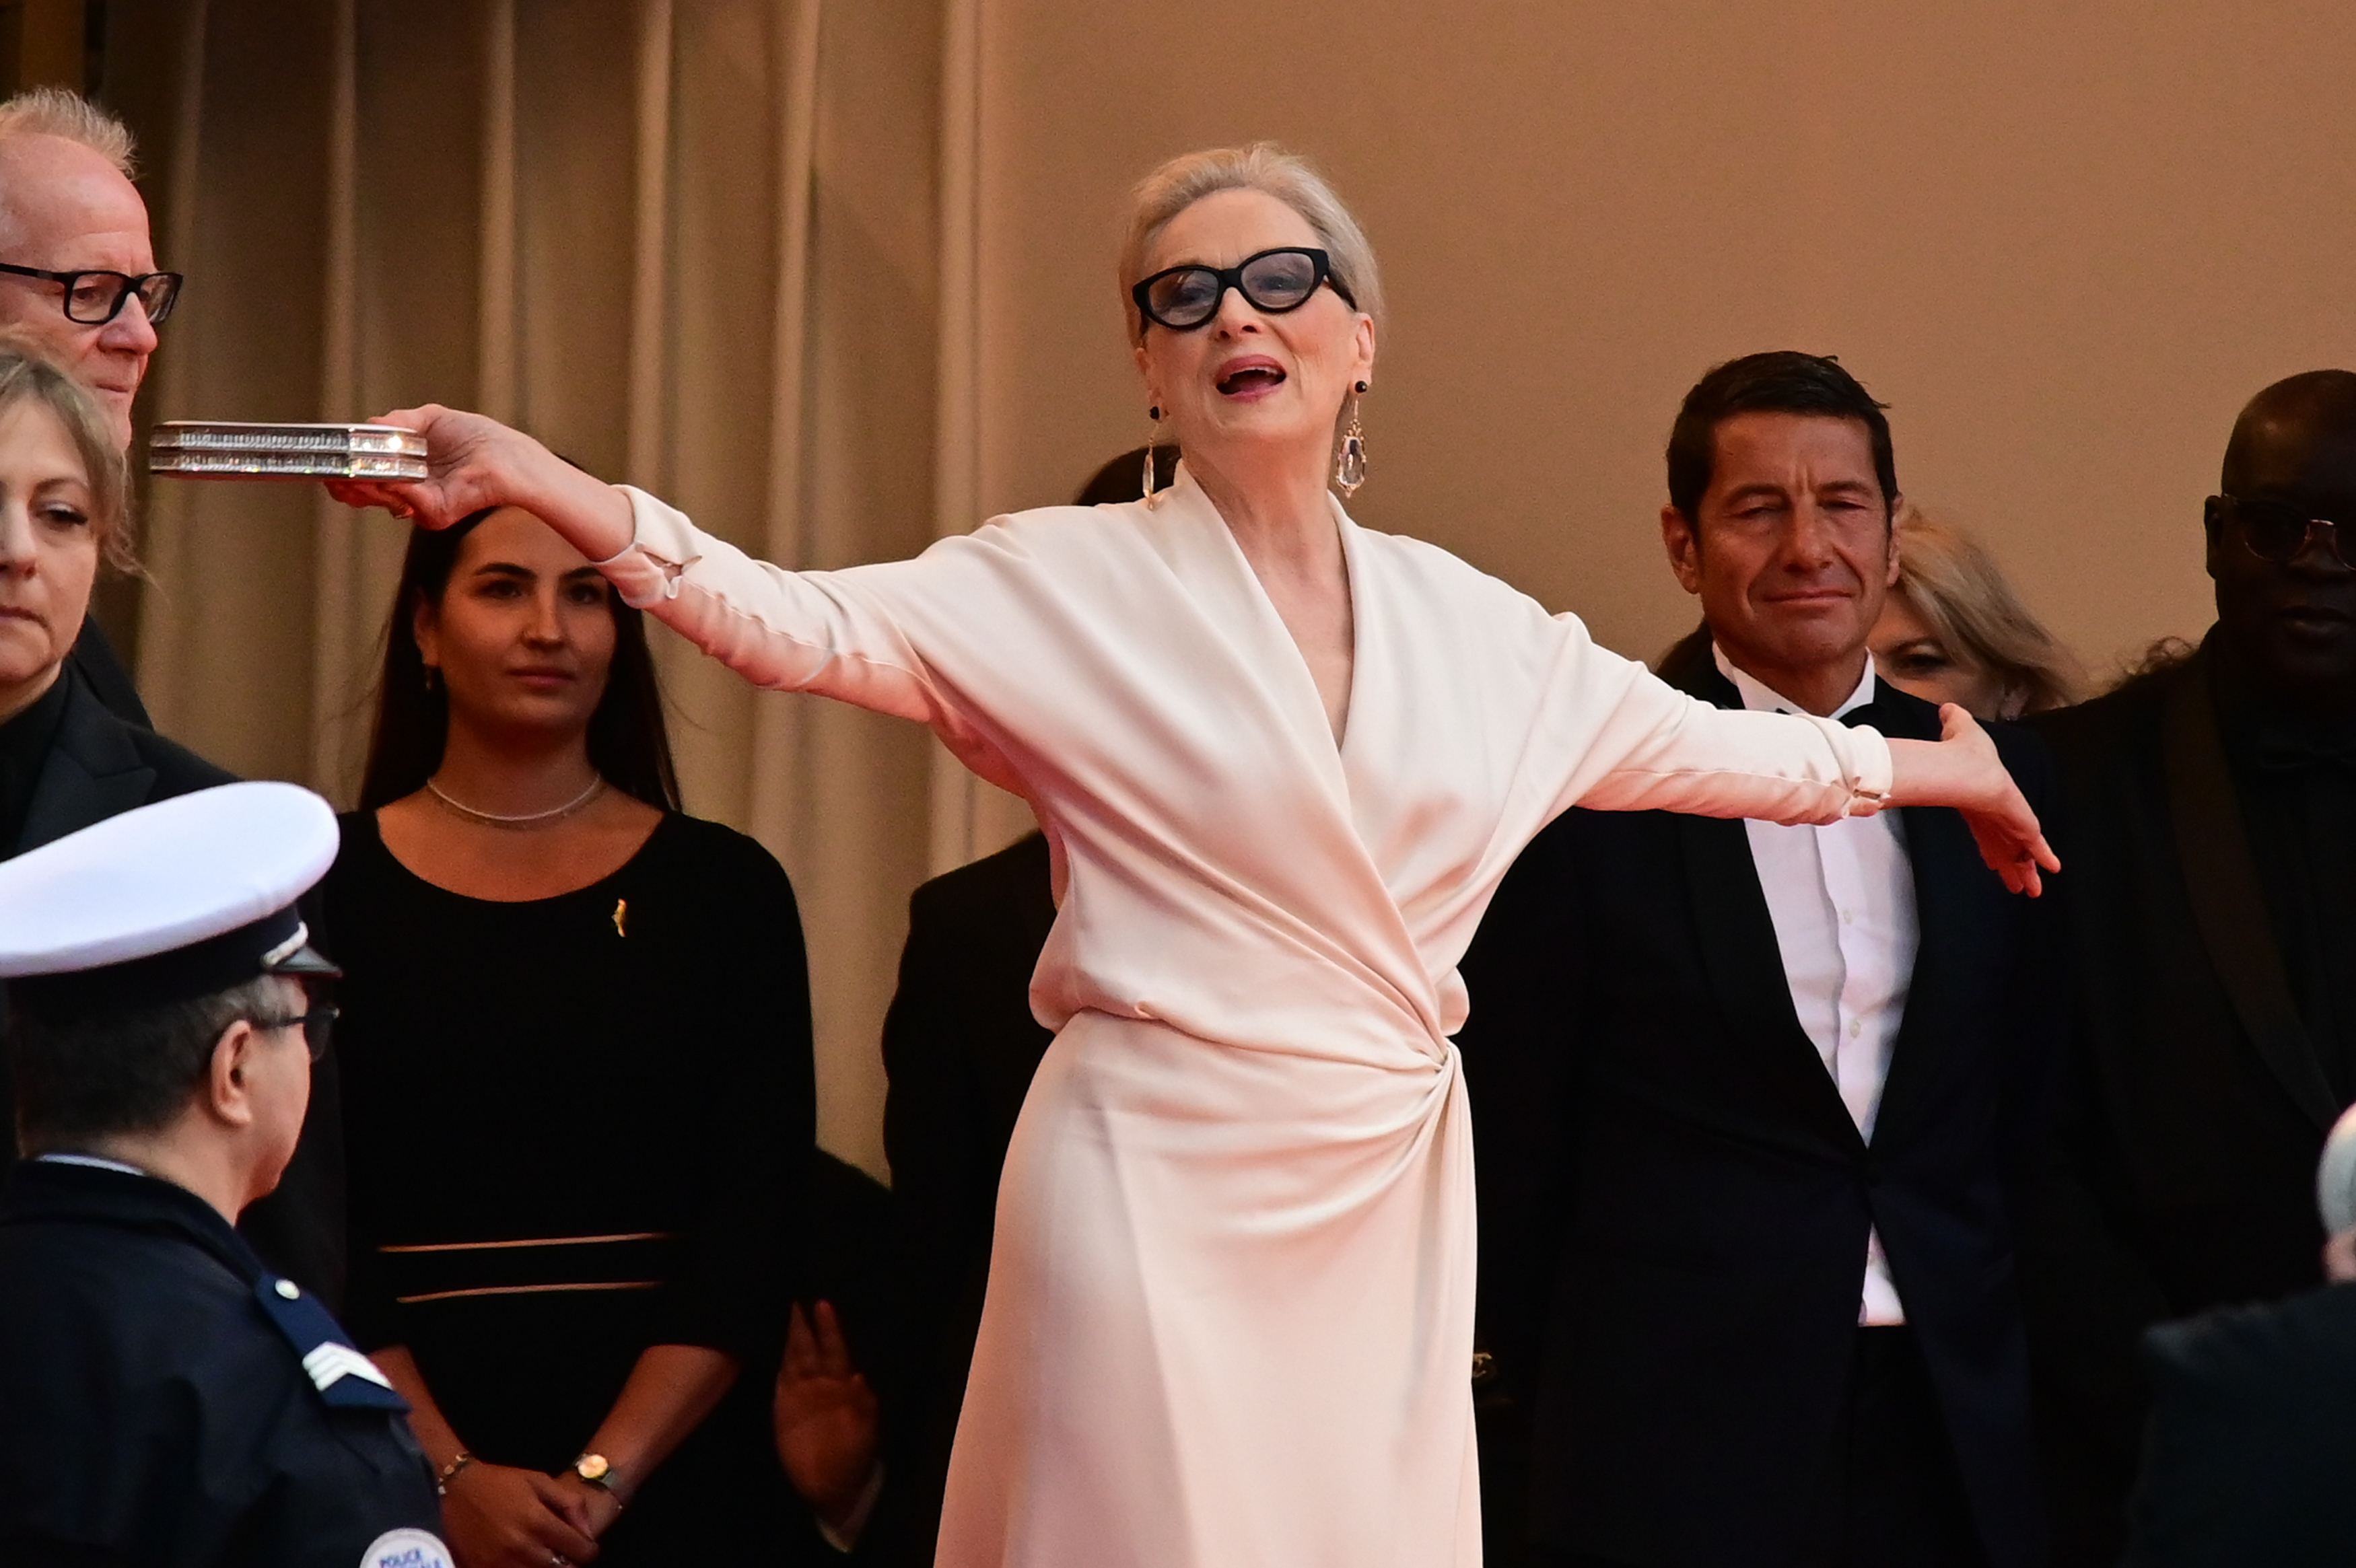 Meryl Streep attends "Le Deuxième Acte" Screening & opening ceremony red carpet at the 77th annual Cannes Film Festival in Cannes, France, on May 14, 2024. | Source: Getty Images